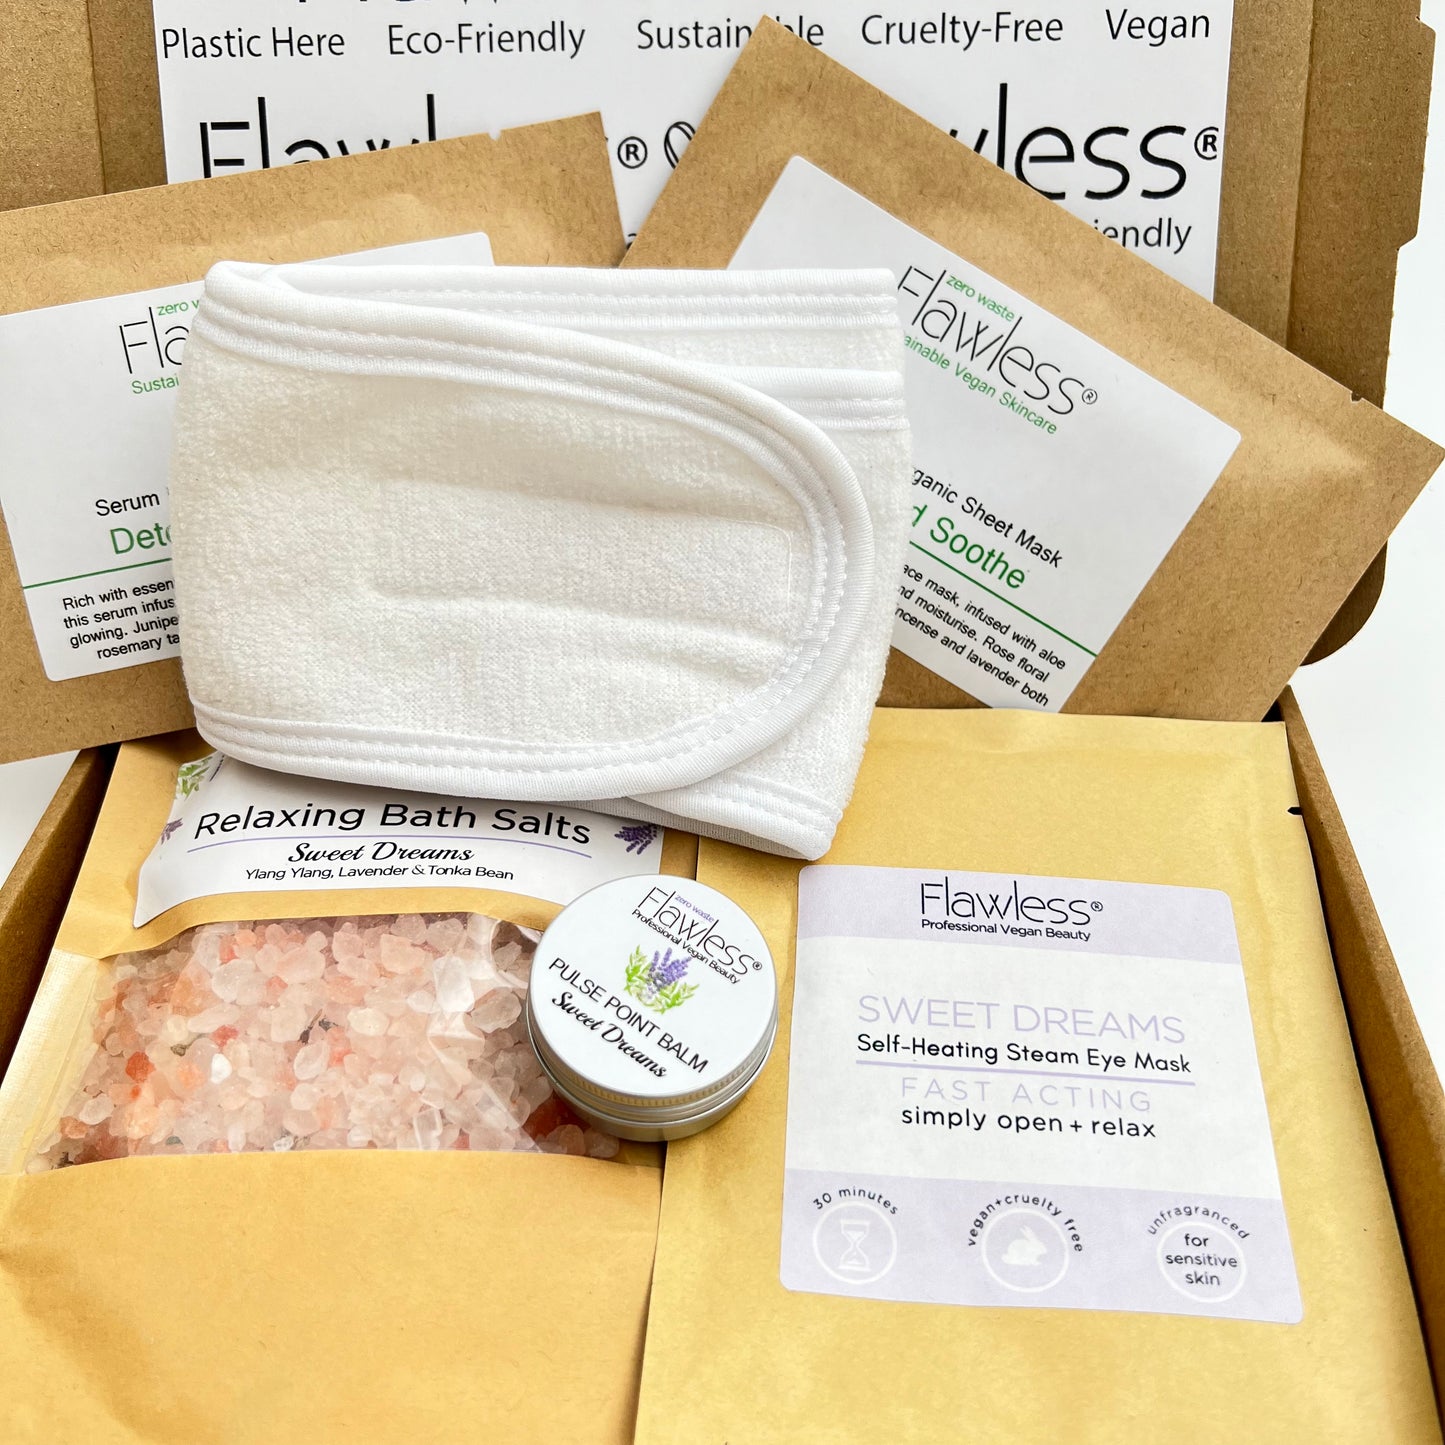 Letterbox Self Care Gift Set